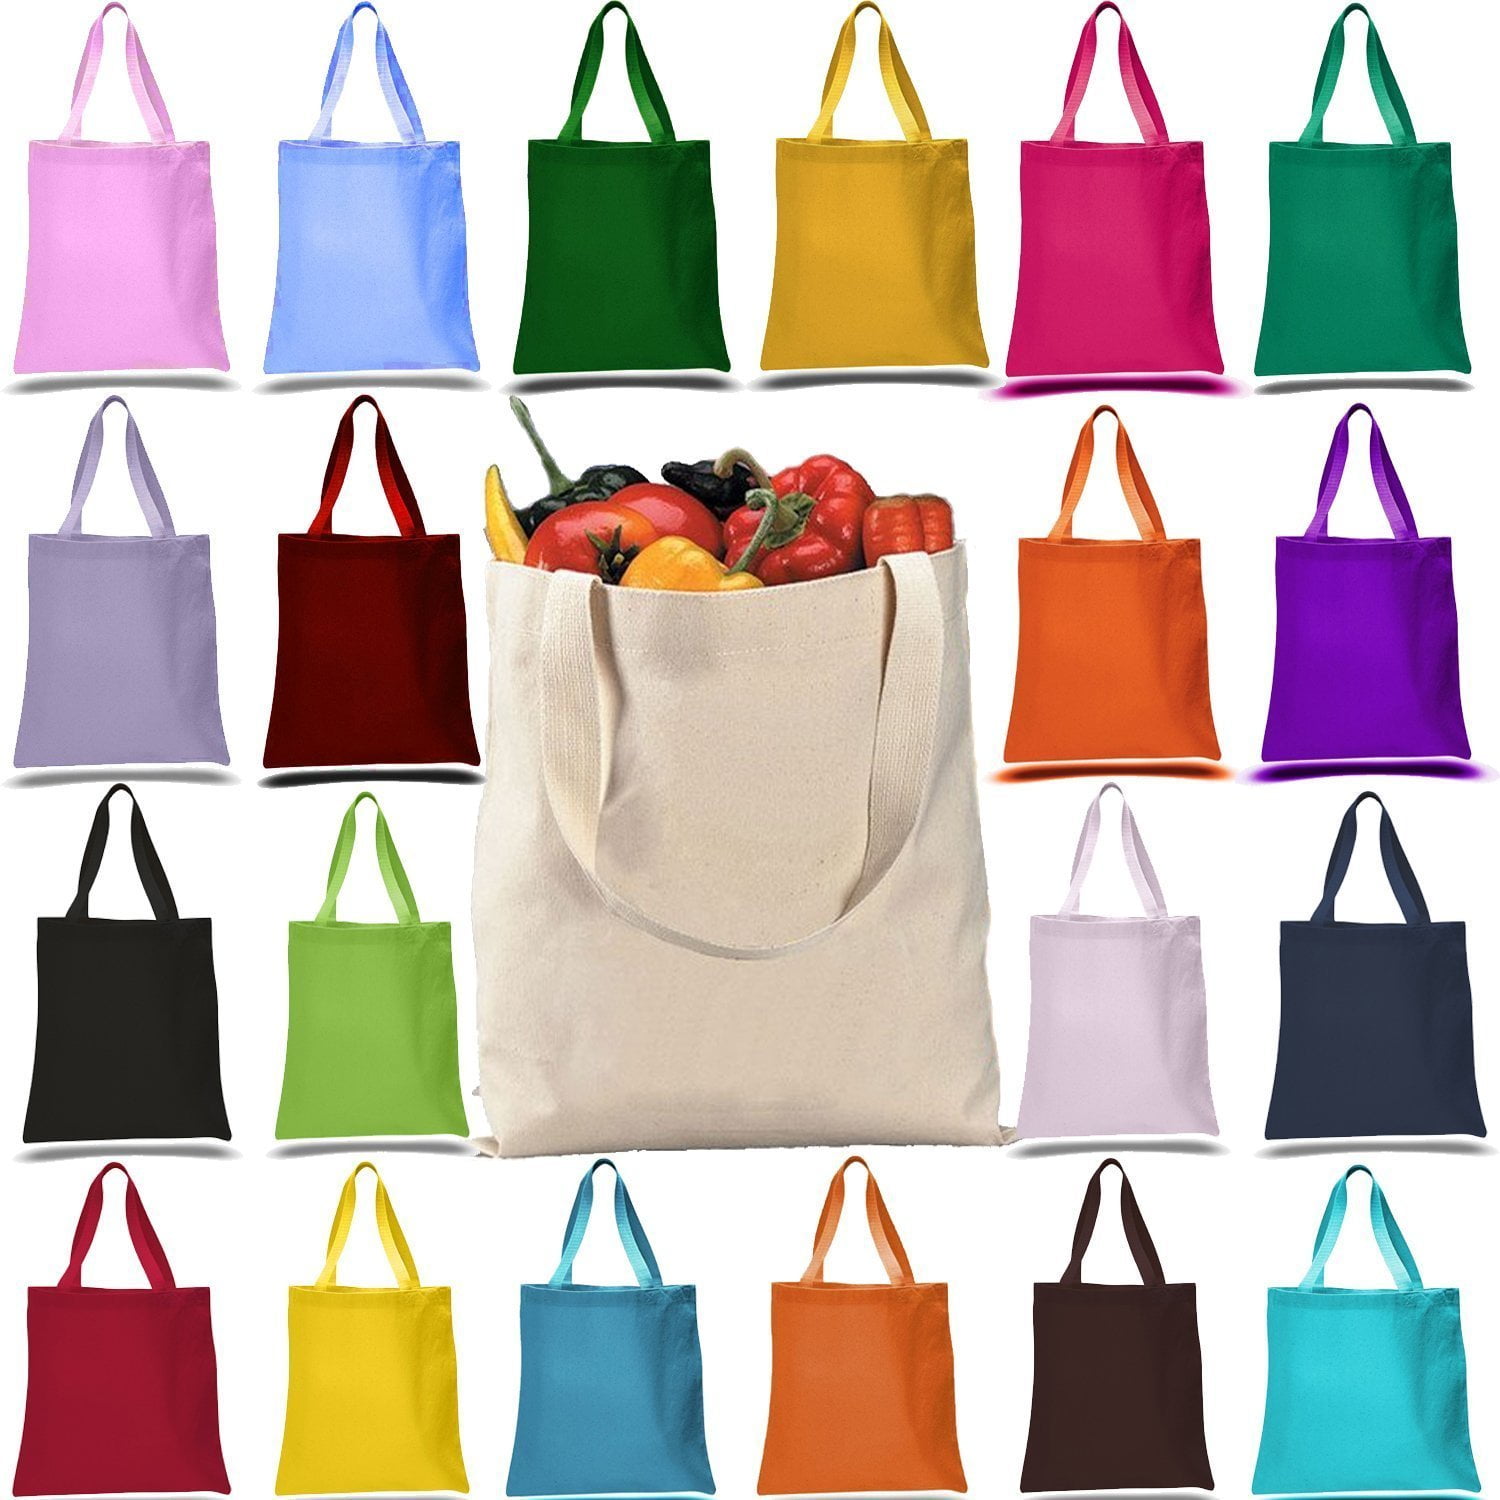 12 PACK Promotional Tote Bags,Cotton Reusable Bags Grocery Bags, Shopping Bags 